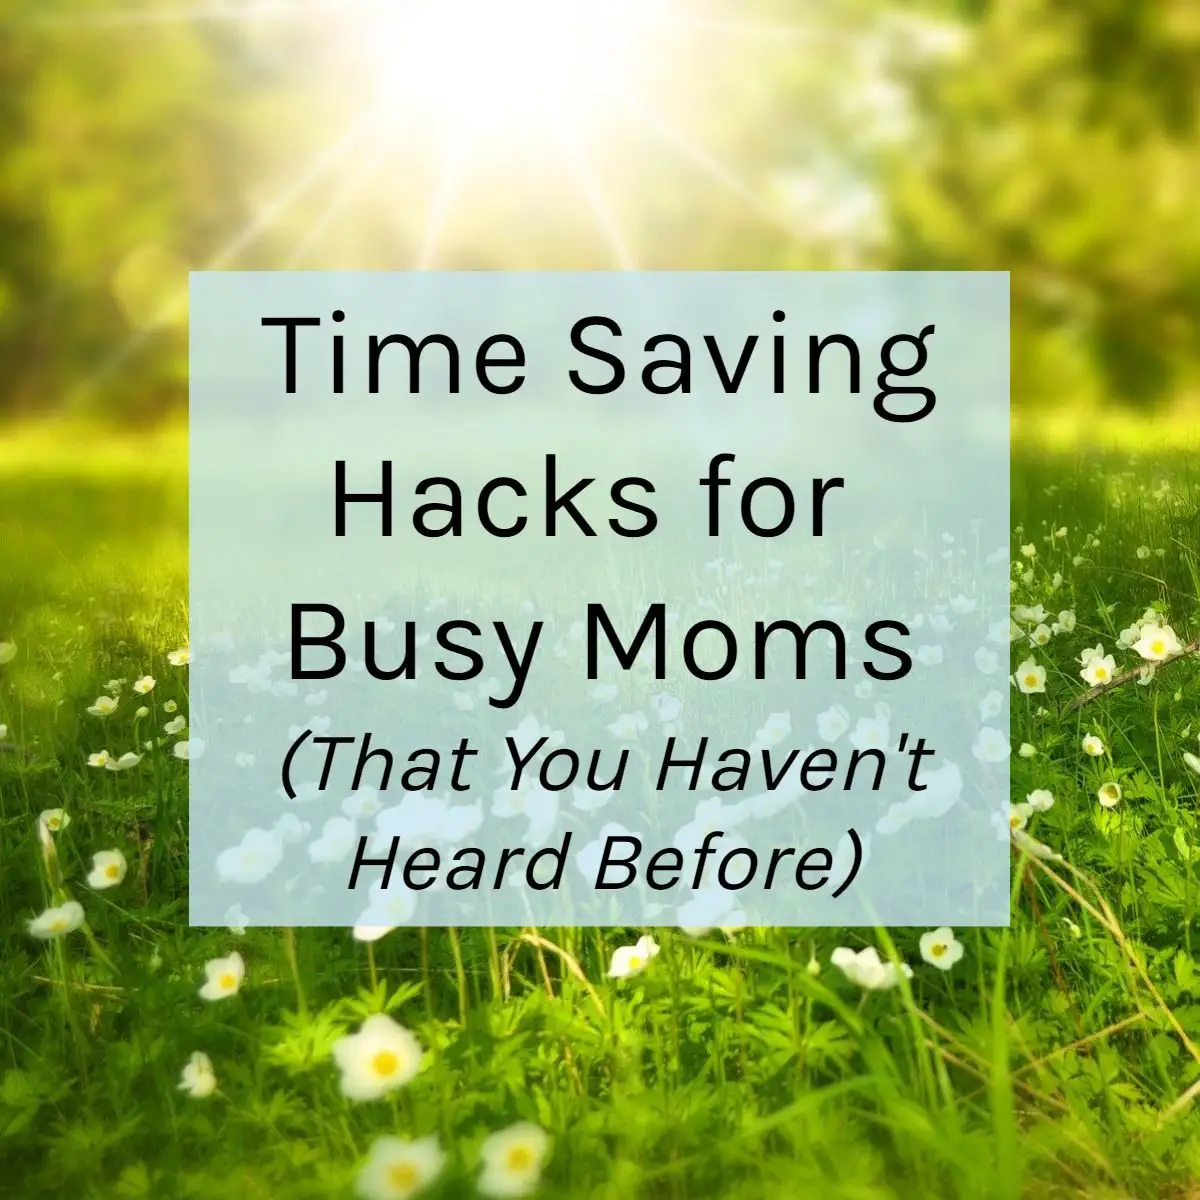 Time Saving Hacks for Busy Moms That You Haven't Heard Before